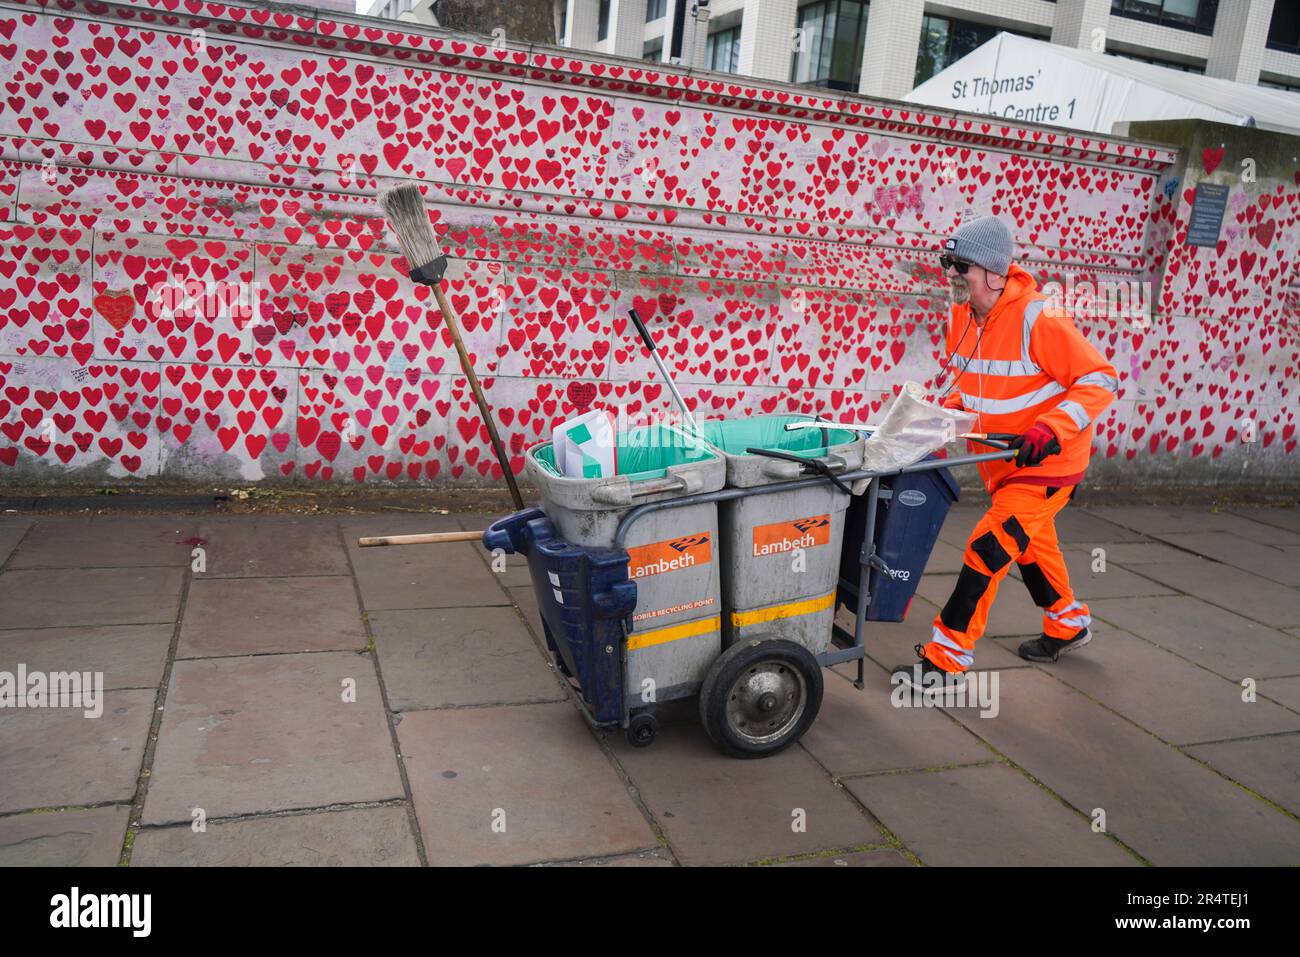 London UK. 30 May 2023 A  Lambeth council worker collects the rubbish along The national covid memorial wall  a public mural comprising thousands of red and pink hearts to commemorate the victims of the COVID-19 pandemic  in the UK. The Covid-19 Inquiry  will start on June 13  that  has been set up to examine the UK’s response to and impact of the Covid-19 pandemic, and learn lessons for the future s chaired by Baroness Heather Hallett, a former Court of Appeal judge . Credit: amer ghazzal/Alamy Live News Stock Photo